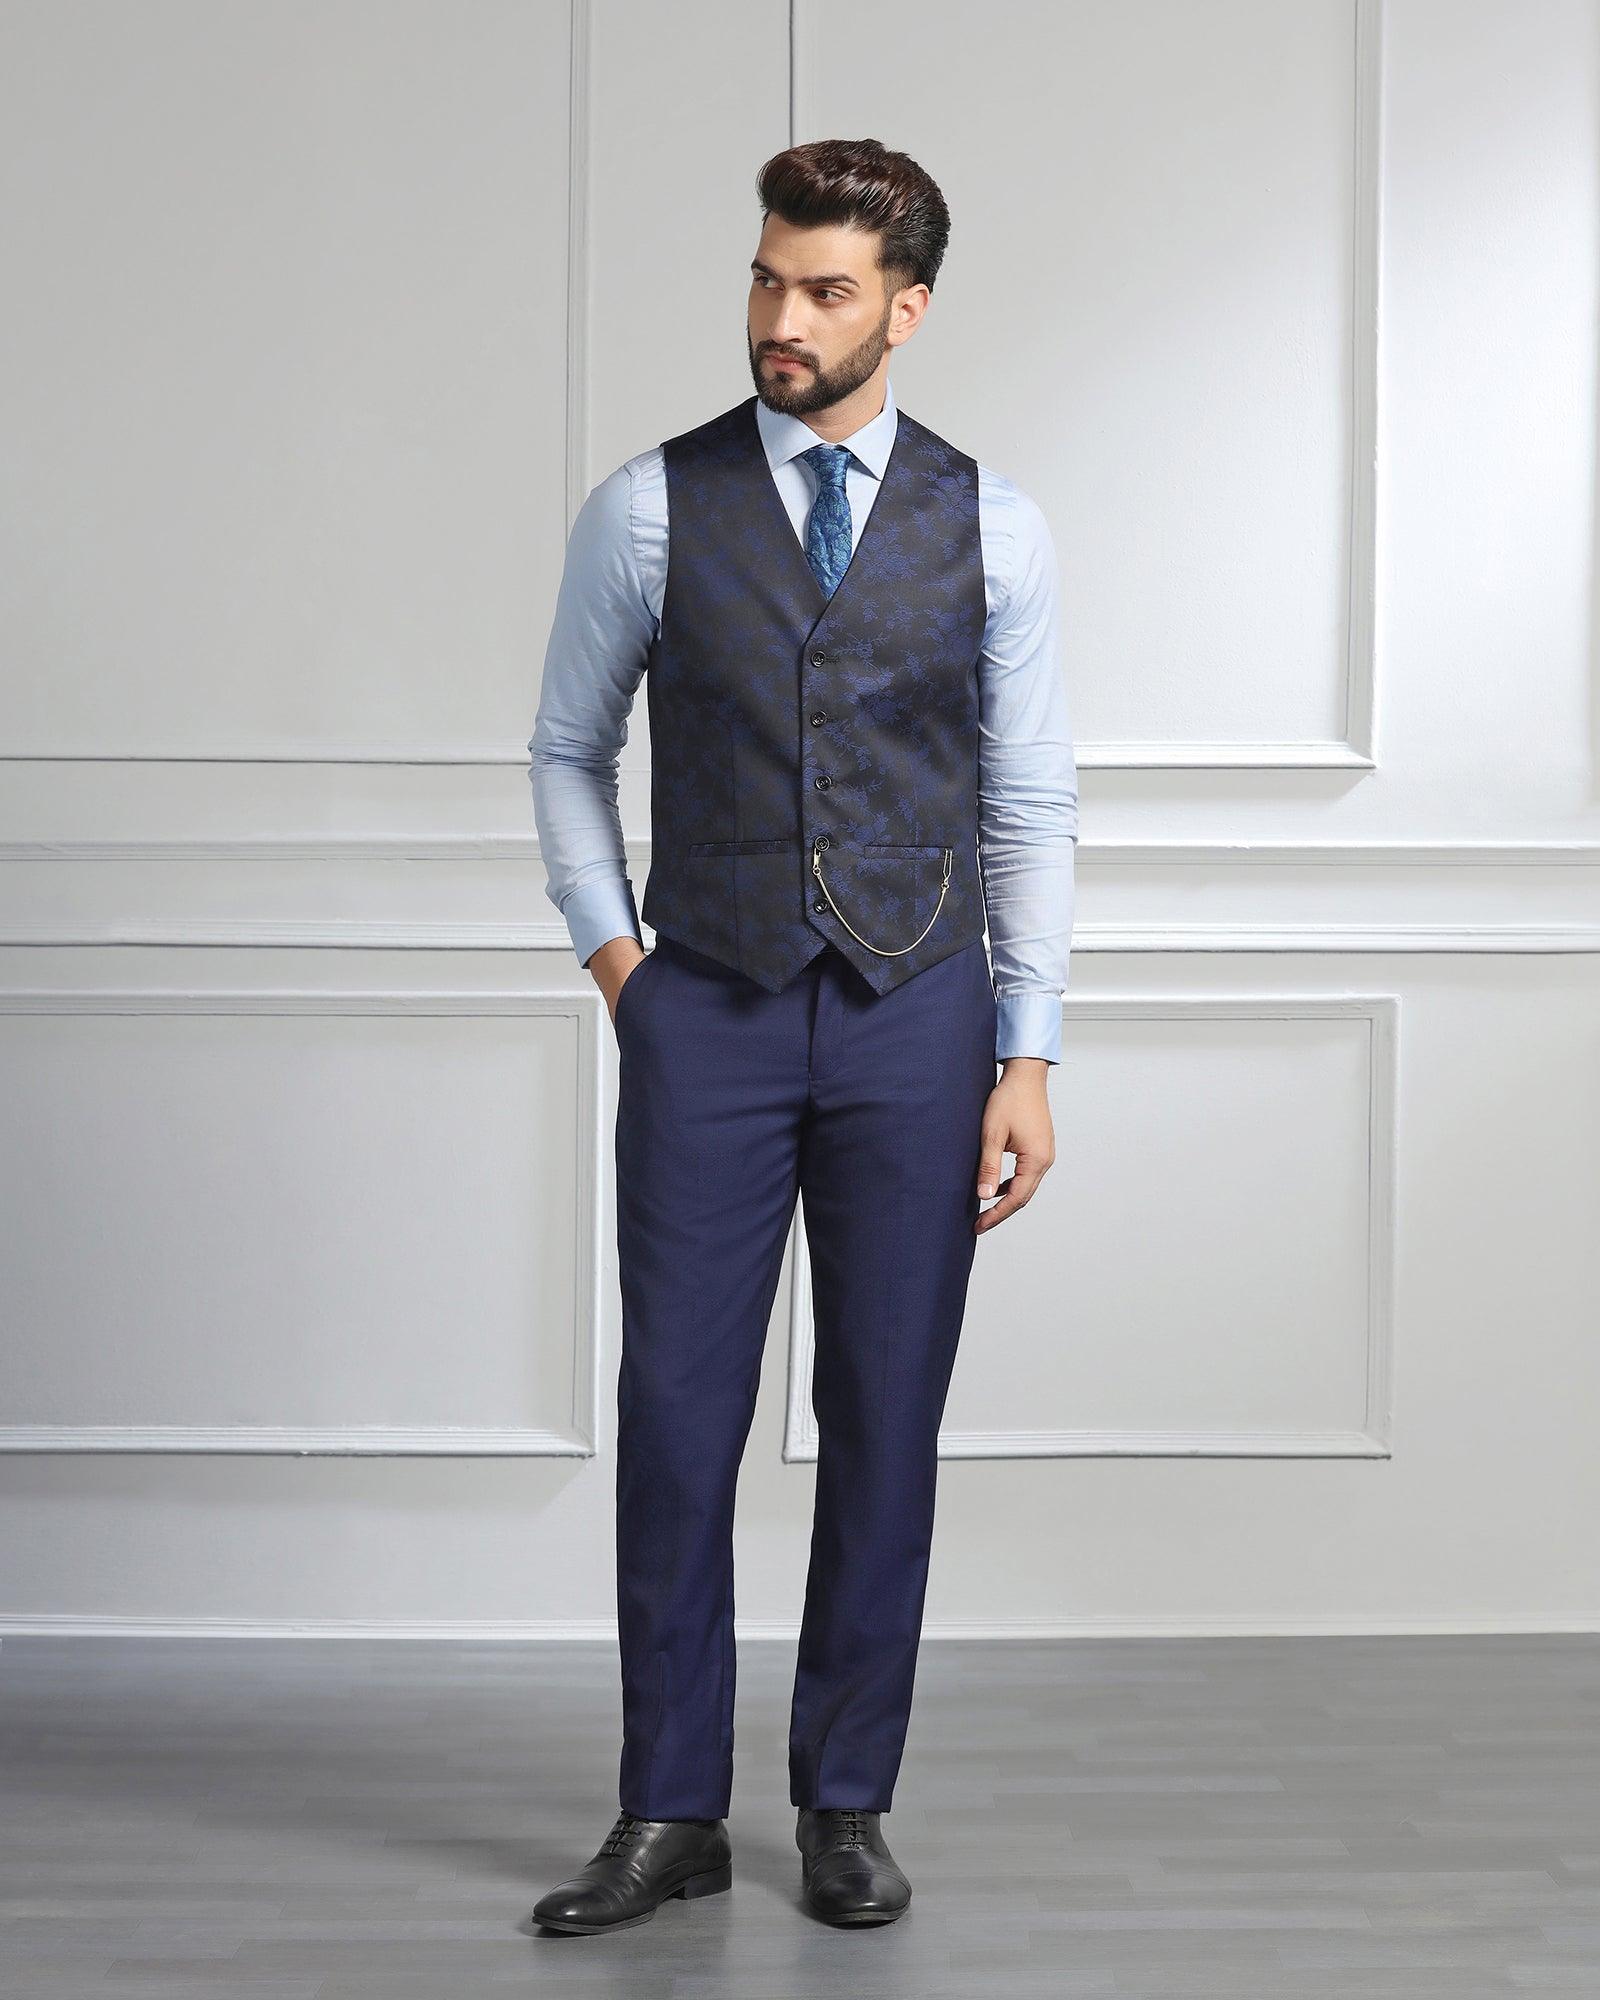 The hottest business casual outfit for men. Featuring a gray suit vest,  light blue dress s… | Stylish business outfits, Business casual outfits,  Mens fashion casual